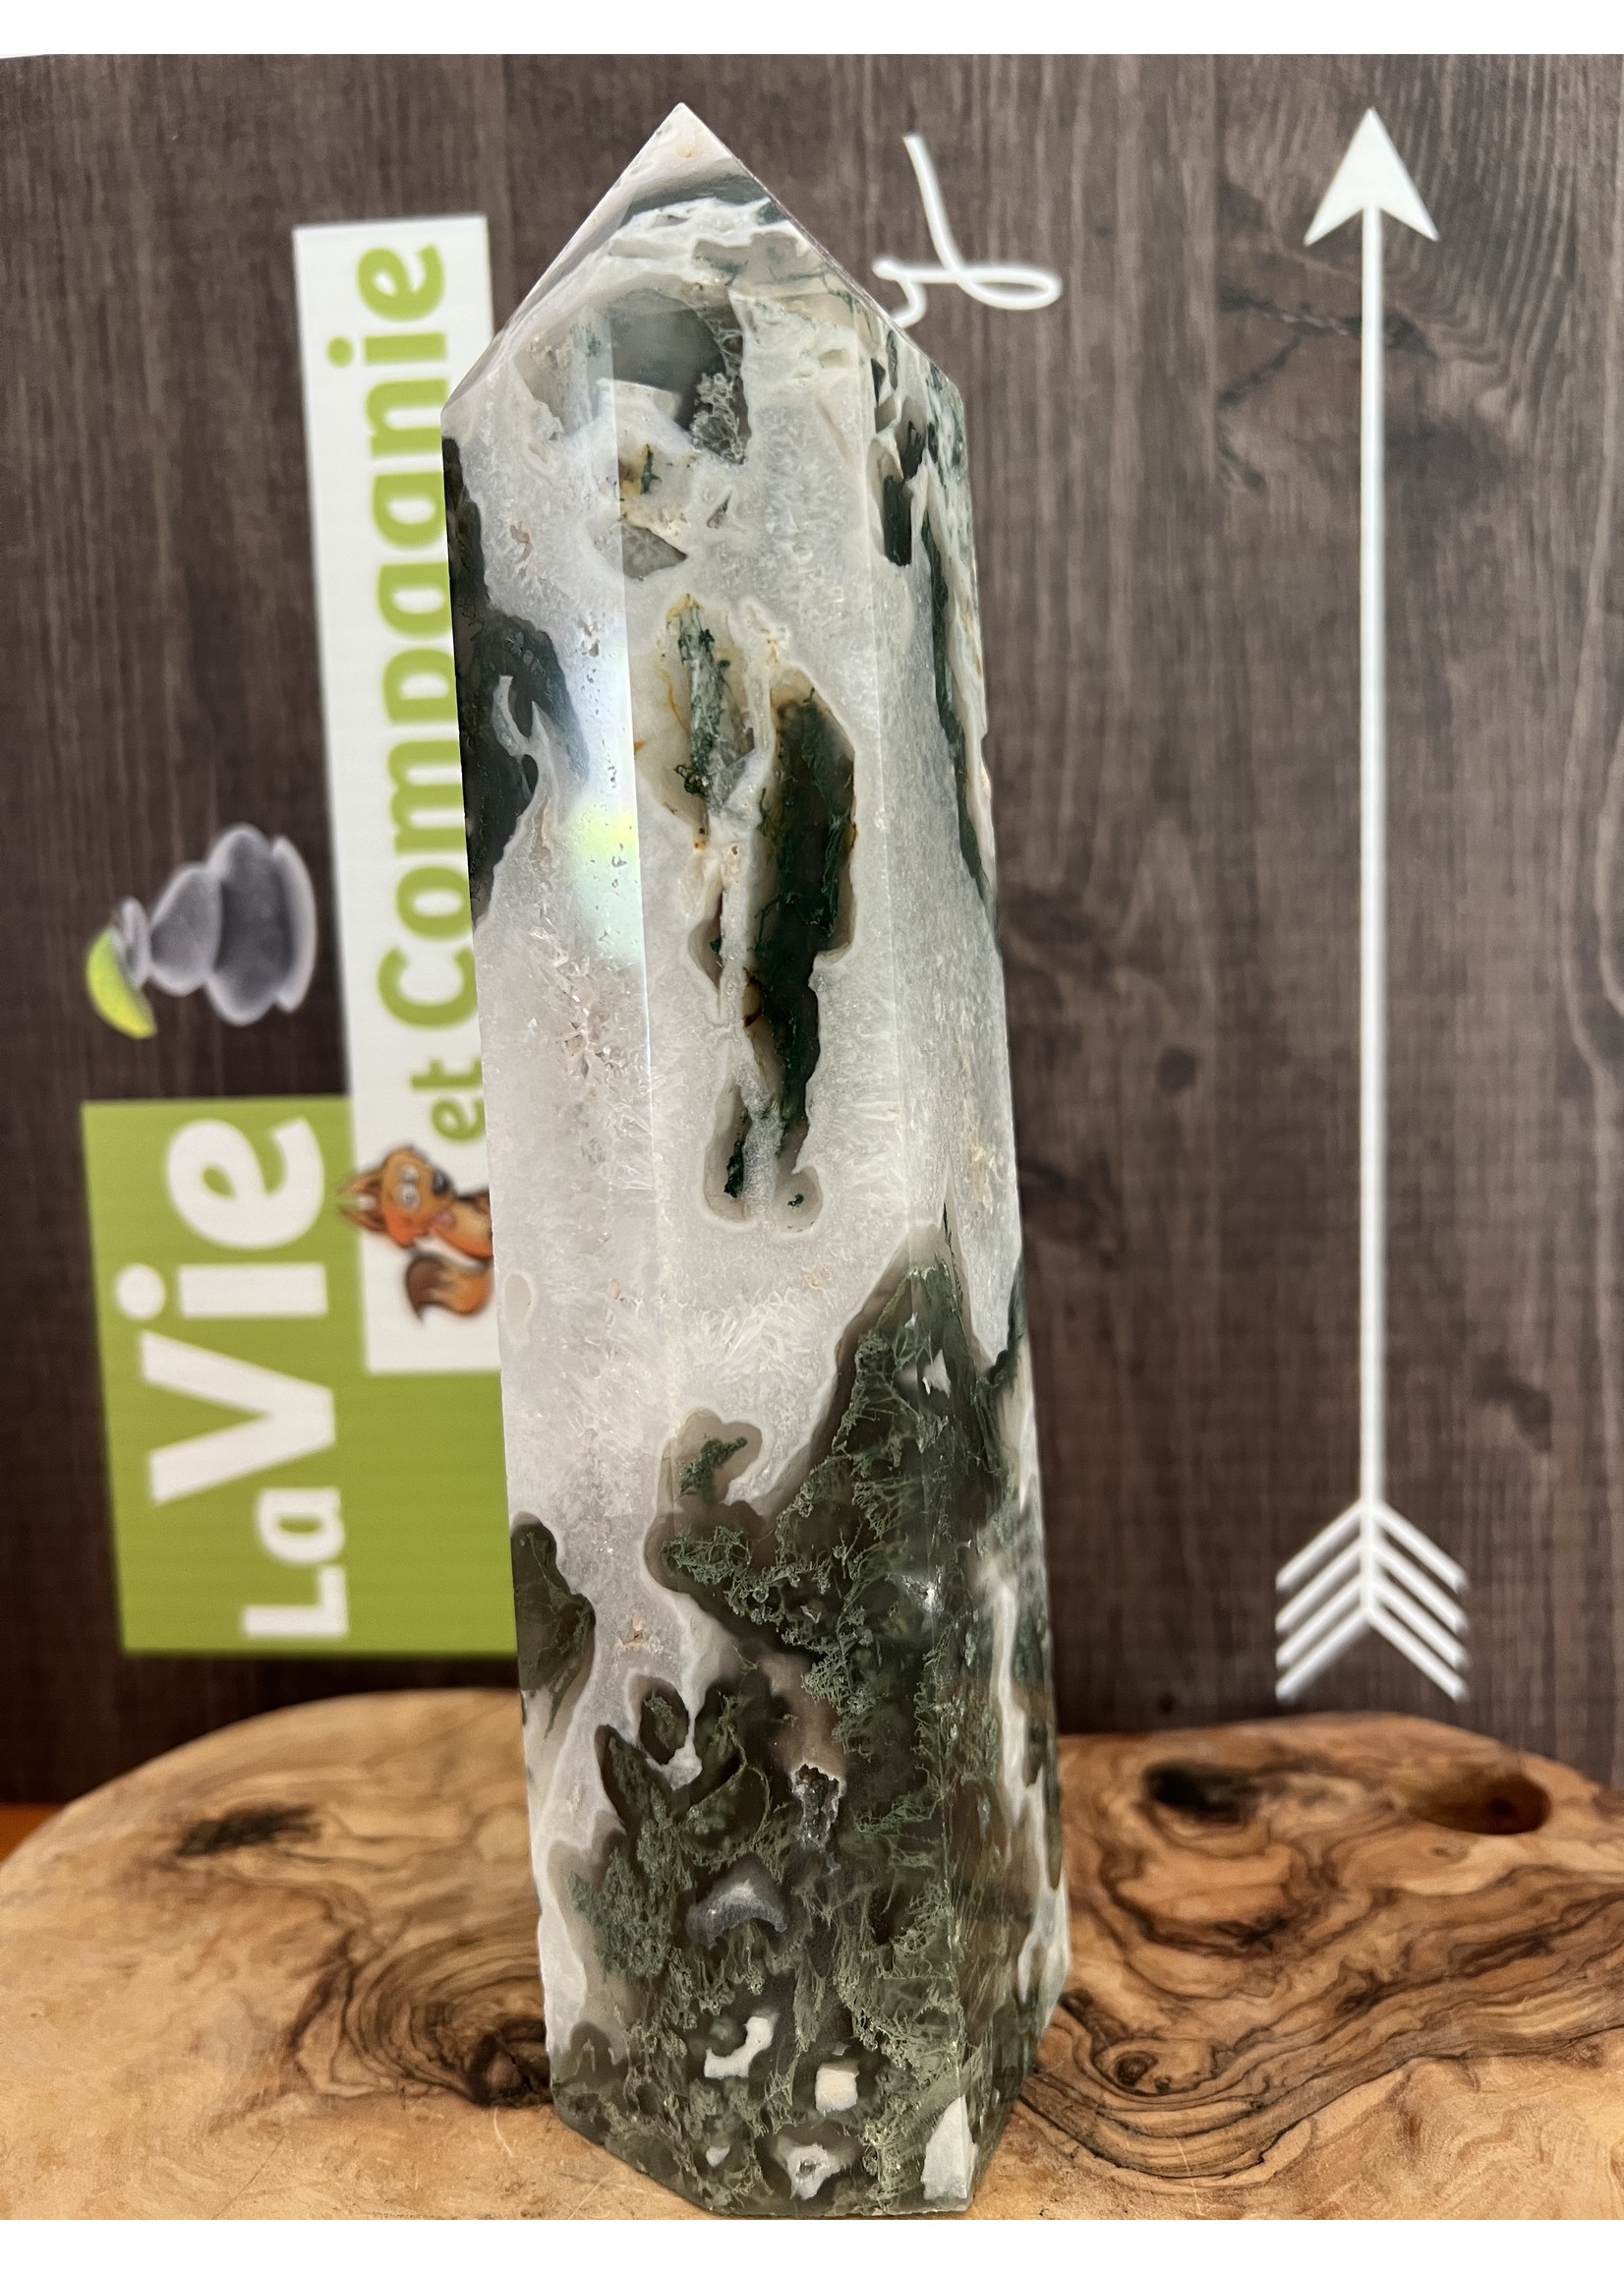 extra-large magnificent moss agate tower, awakens sensitivity and joy, attracts balance peace and quiet